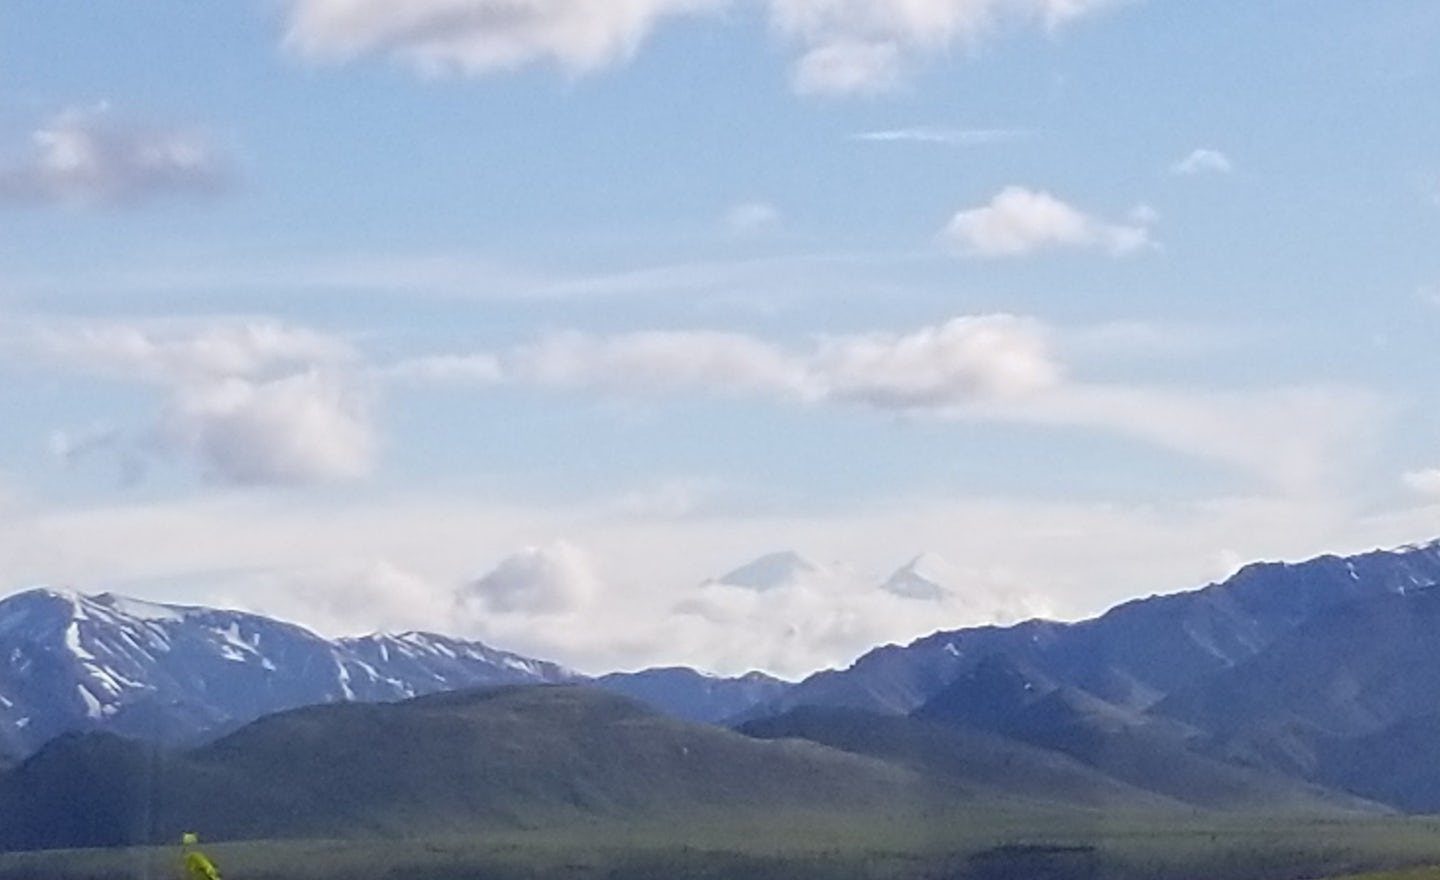 Denali peaks over the clouds. Only 30% get to see mountain.